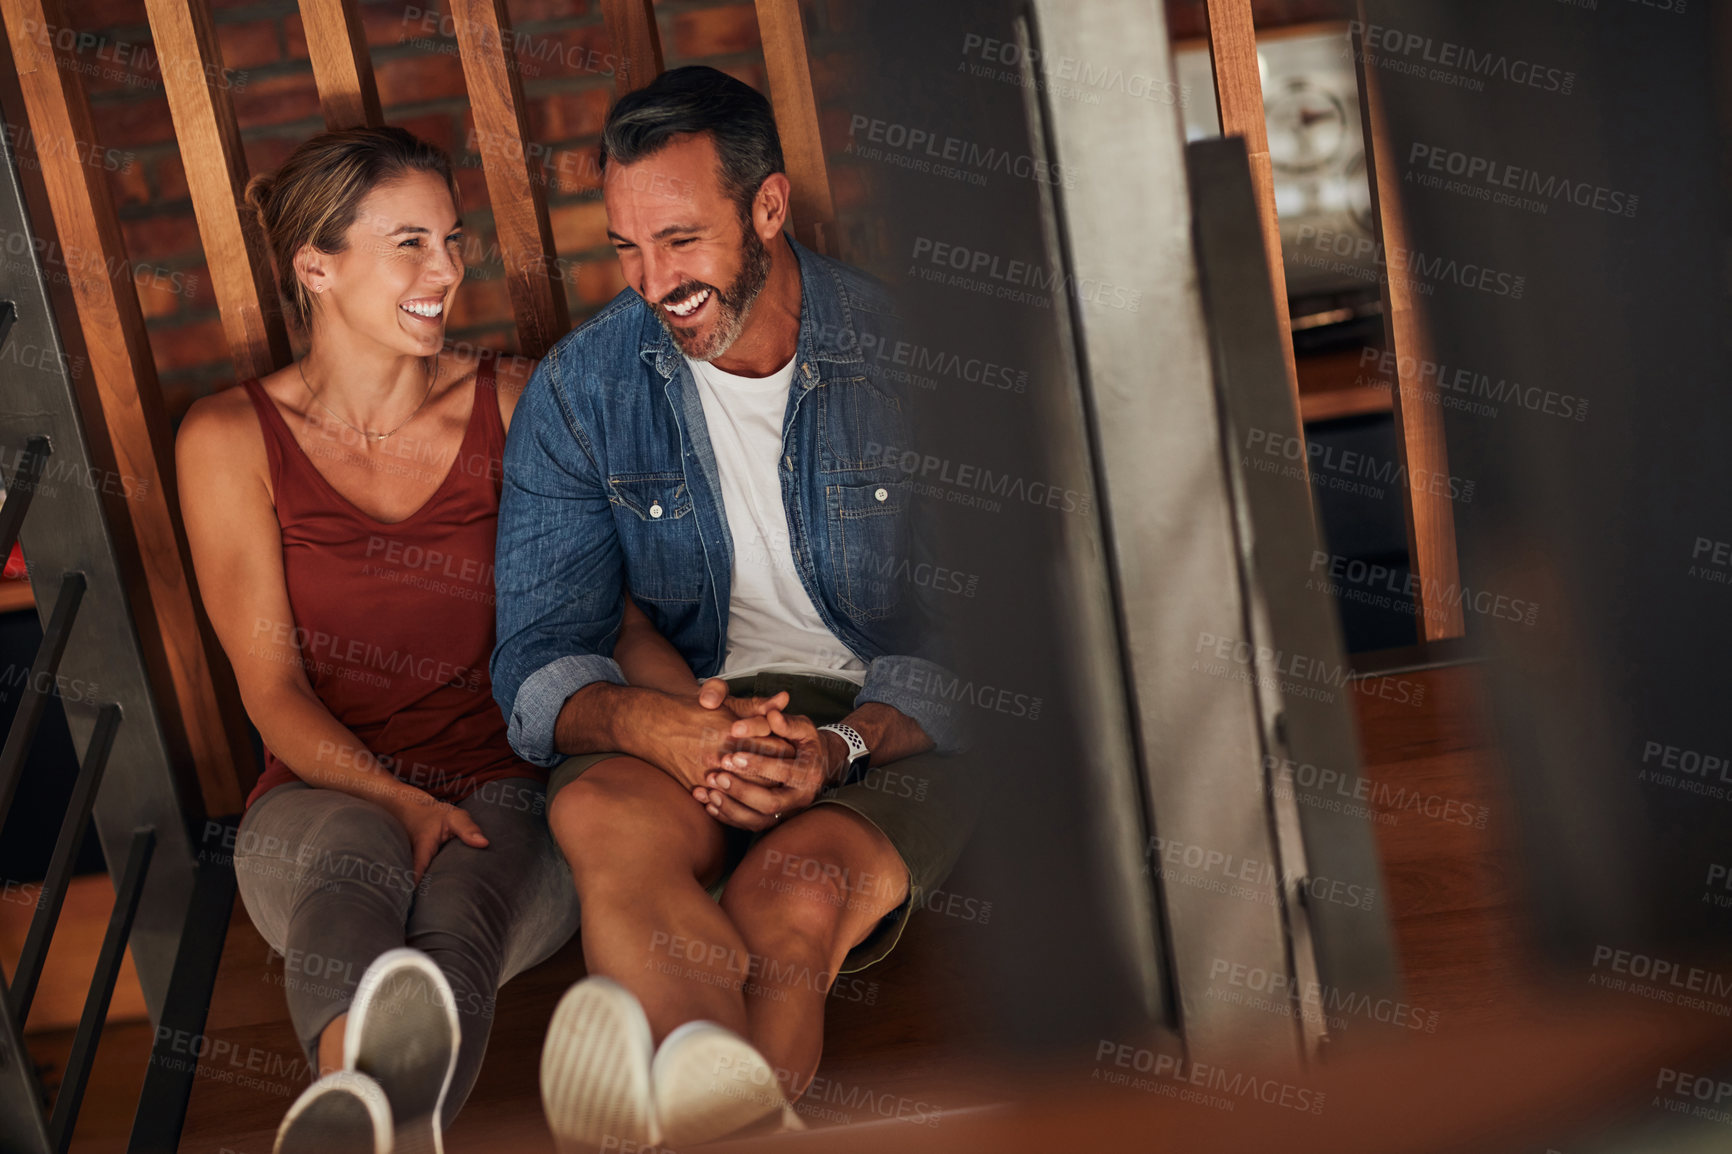 Buy stock photo Shot of a middle aged couple having a good time while relaxing on the floor indoors